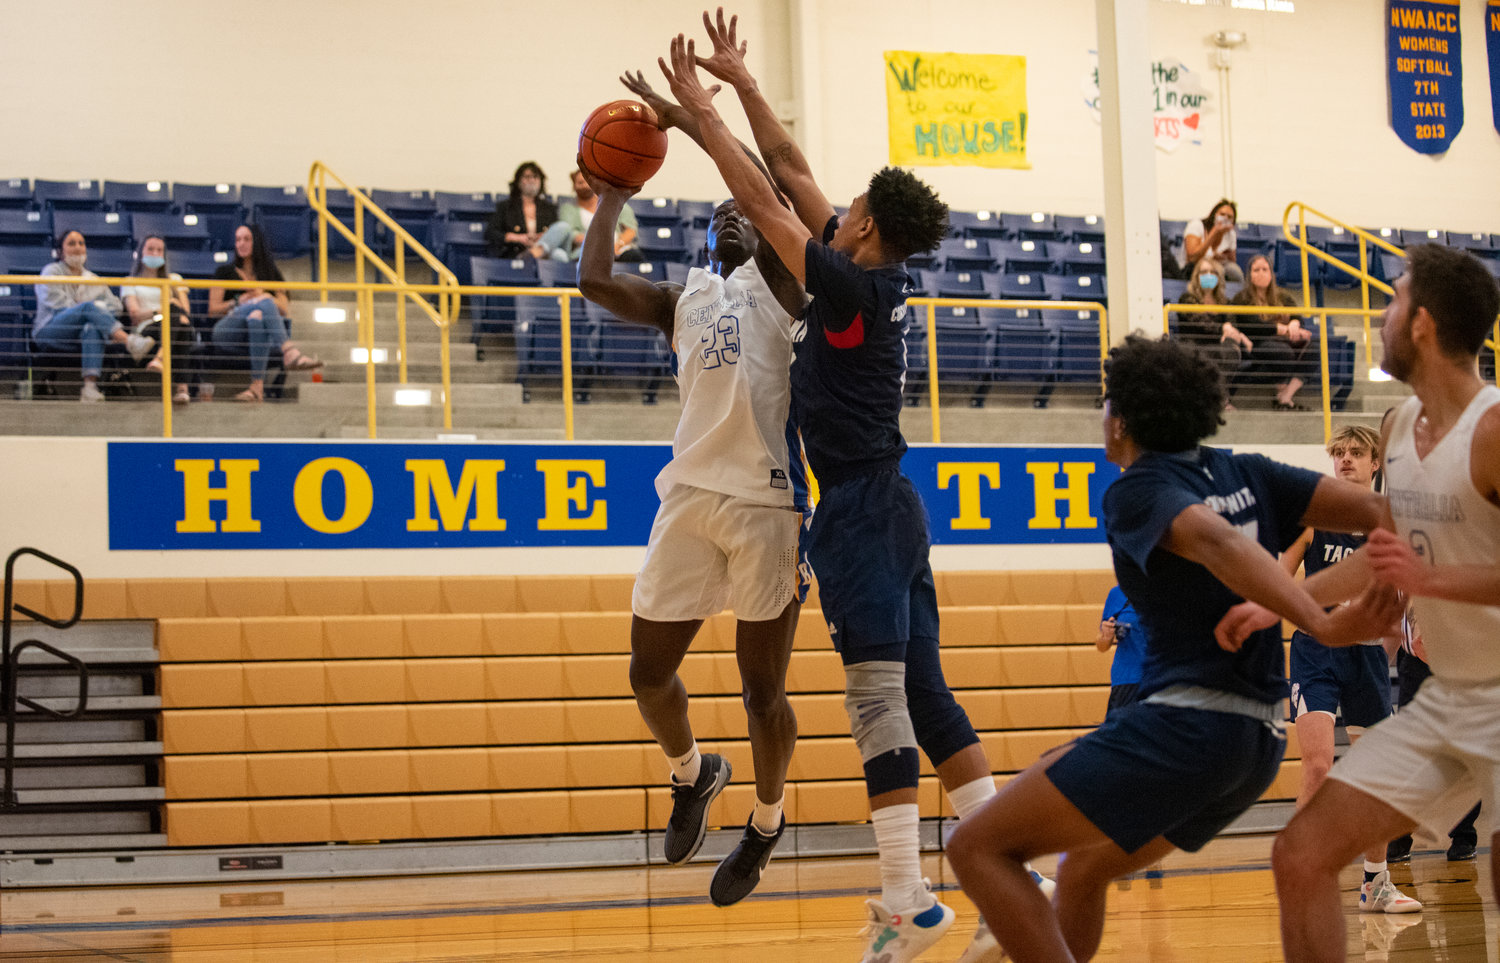 Centralia College sophomore James Harding takes it to the hoop against a Tacoma defender at home on Friday night.